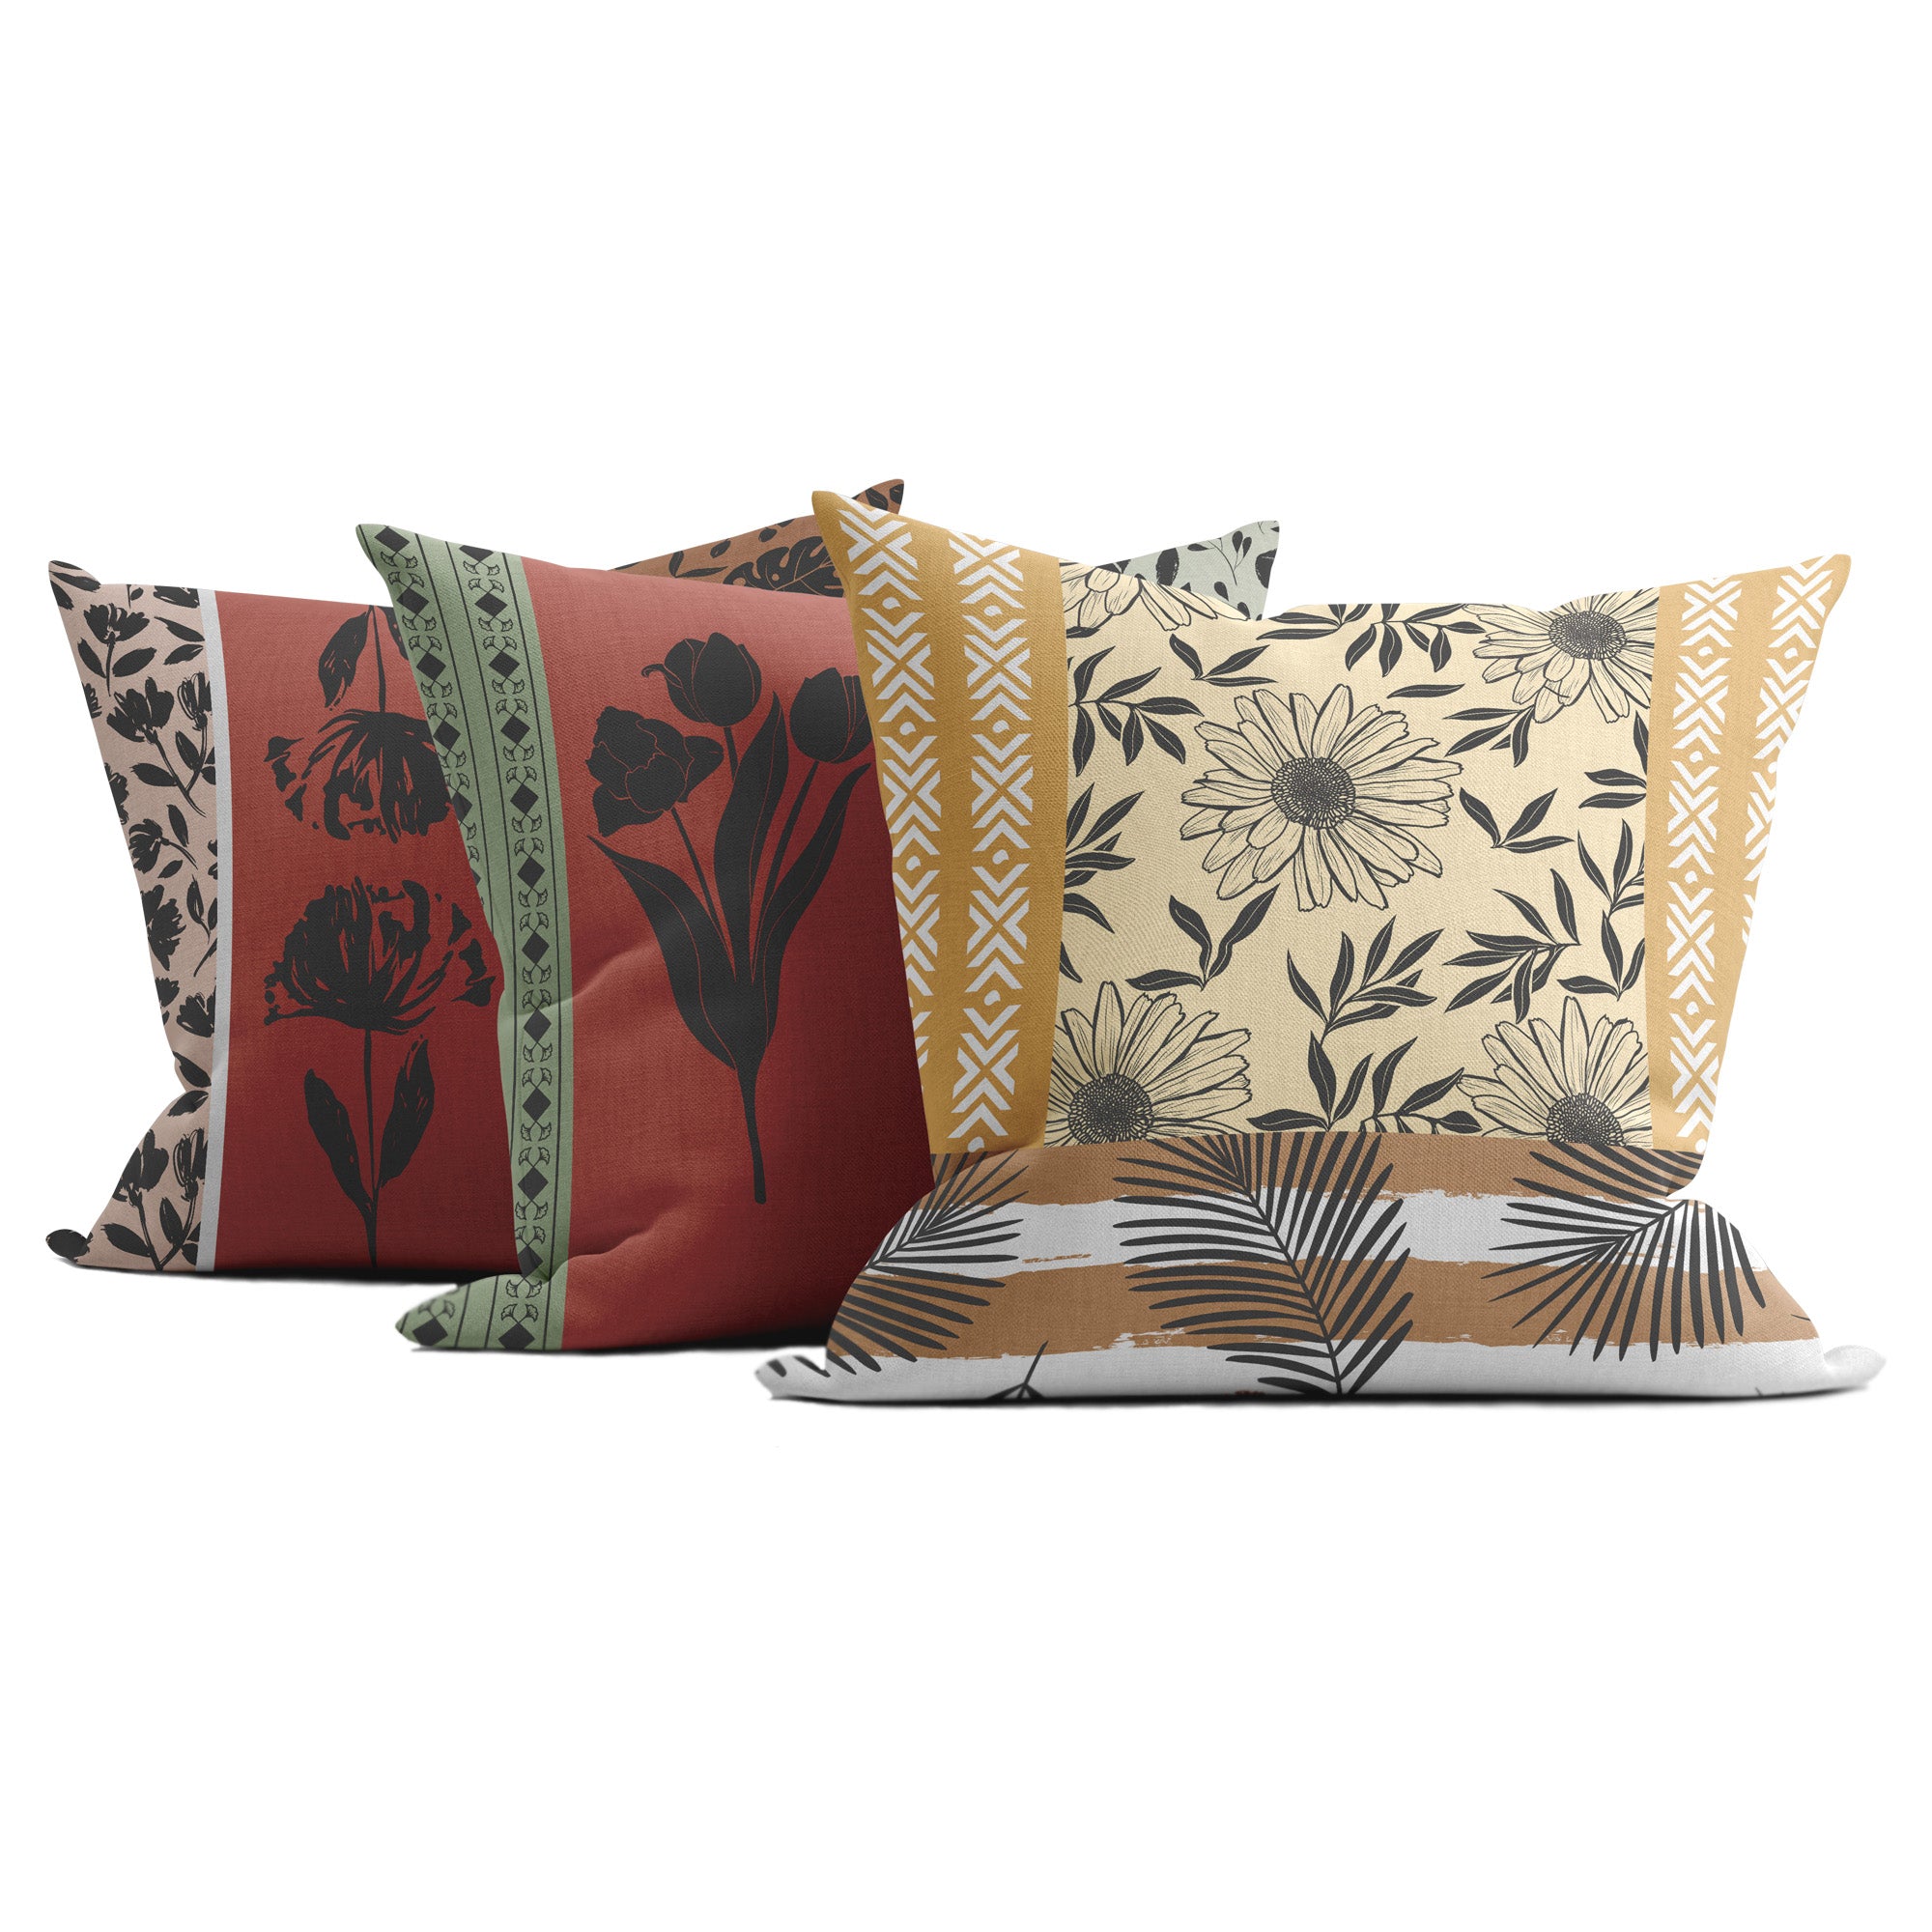 Spoils of Earth Floral Printed Pillow Cover